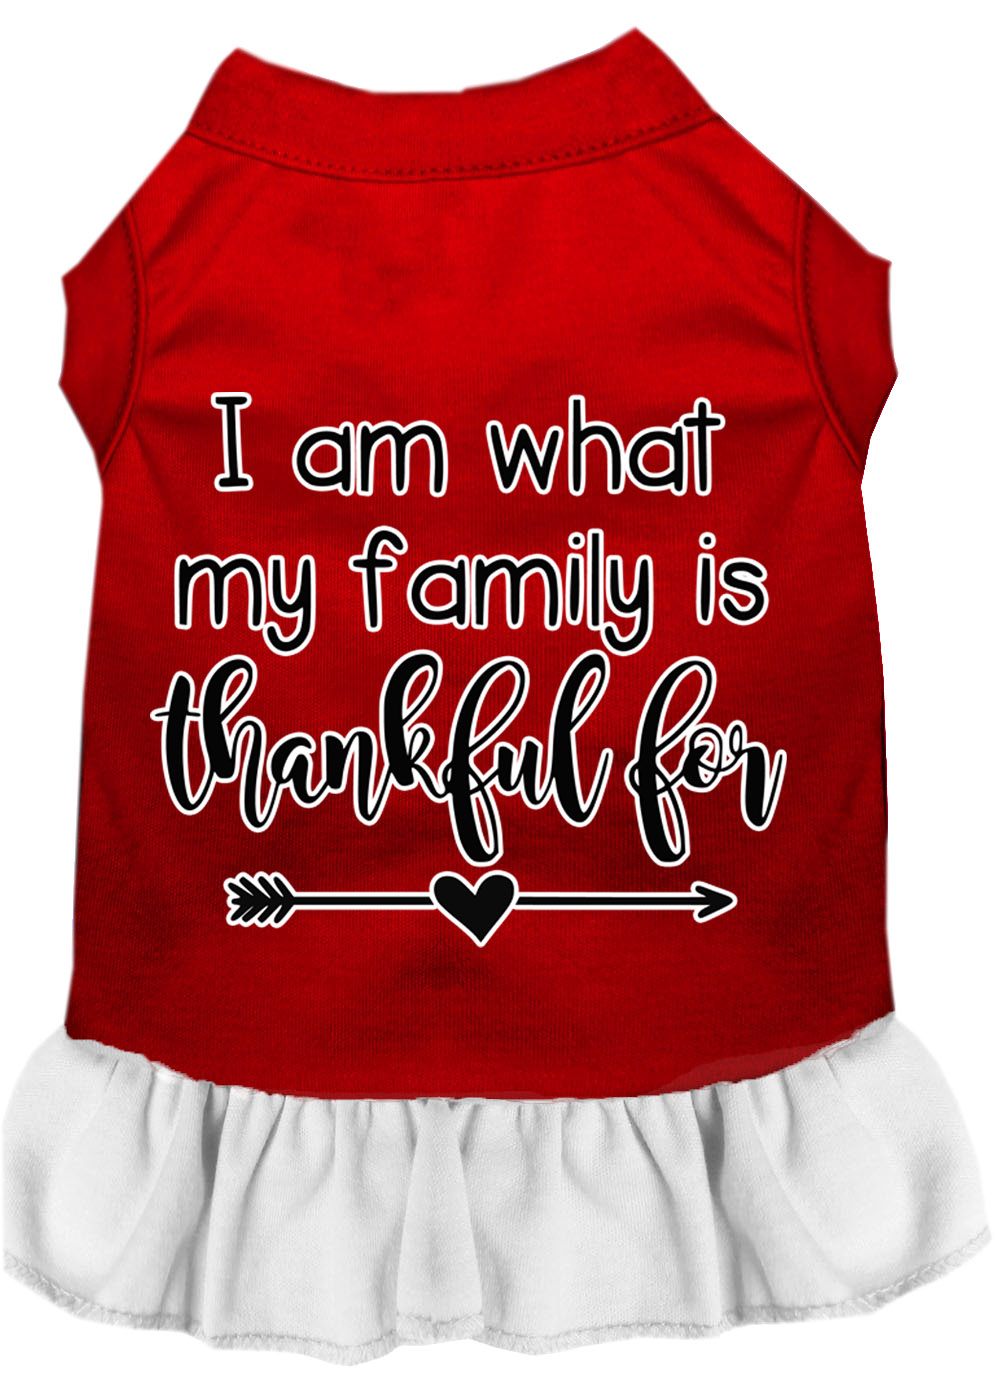 I Am What My Family is Thankful For Screen Print Dog Dress Red with White XXXL